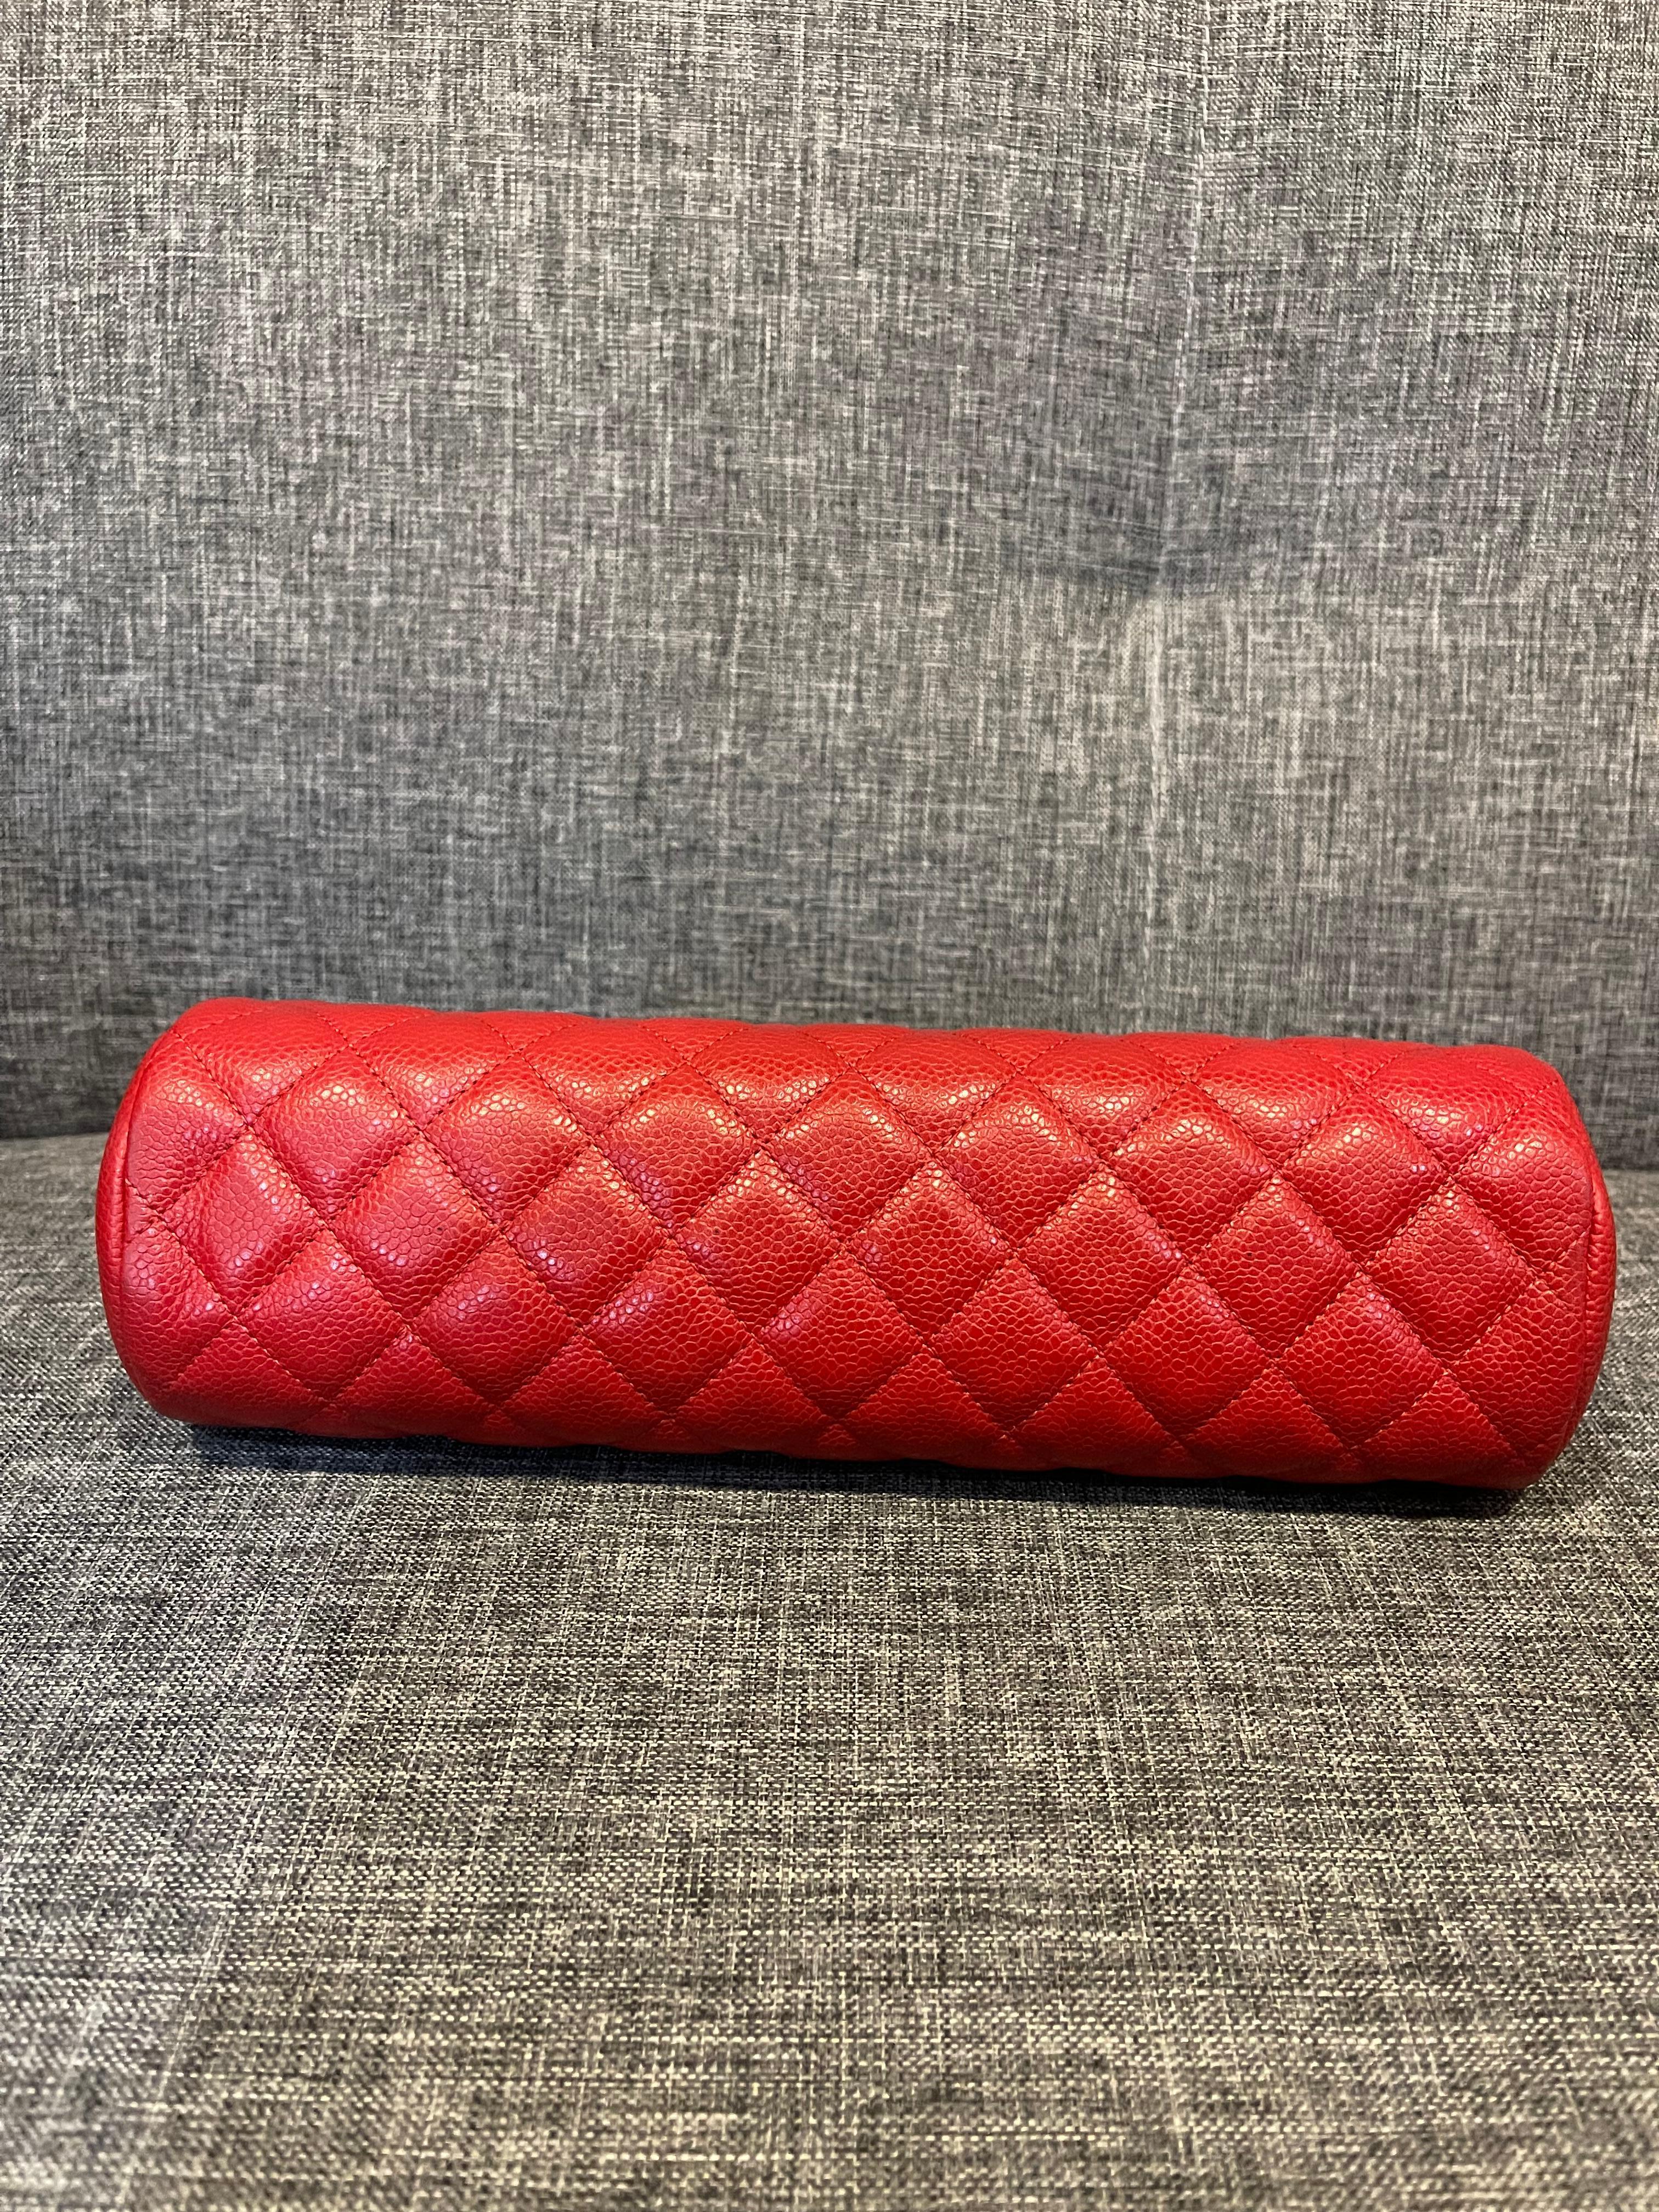 Chanel Red Caviar Leather Quilted Timeless Clutch For Sale 1